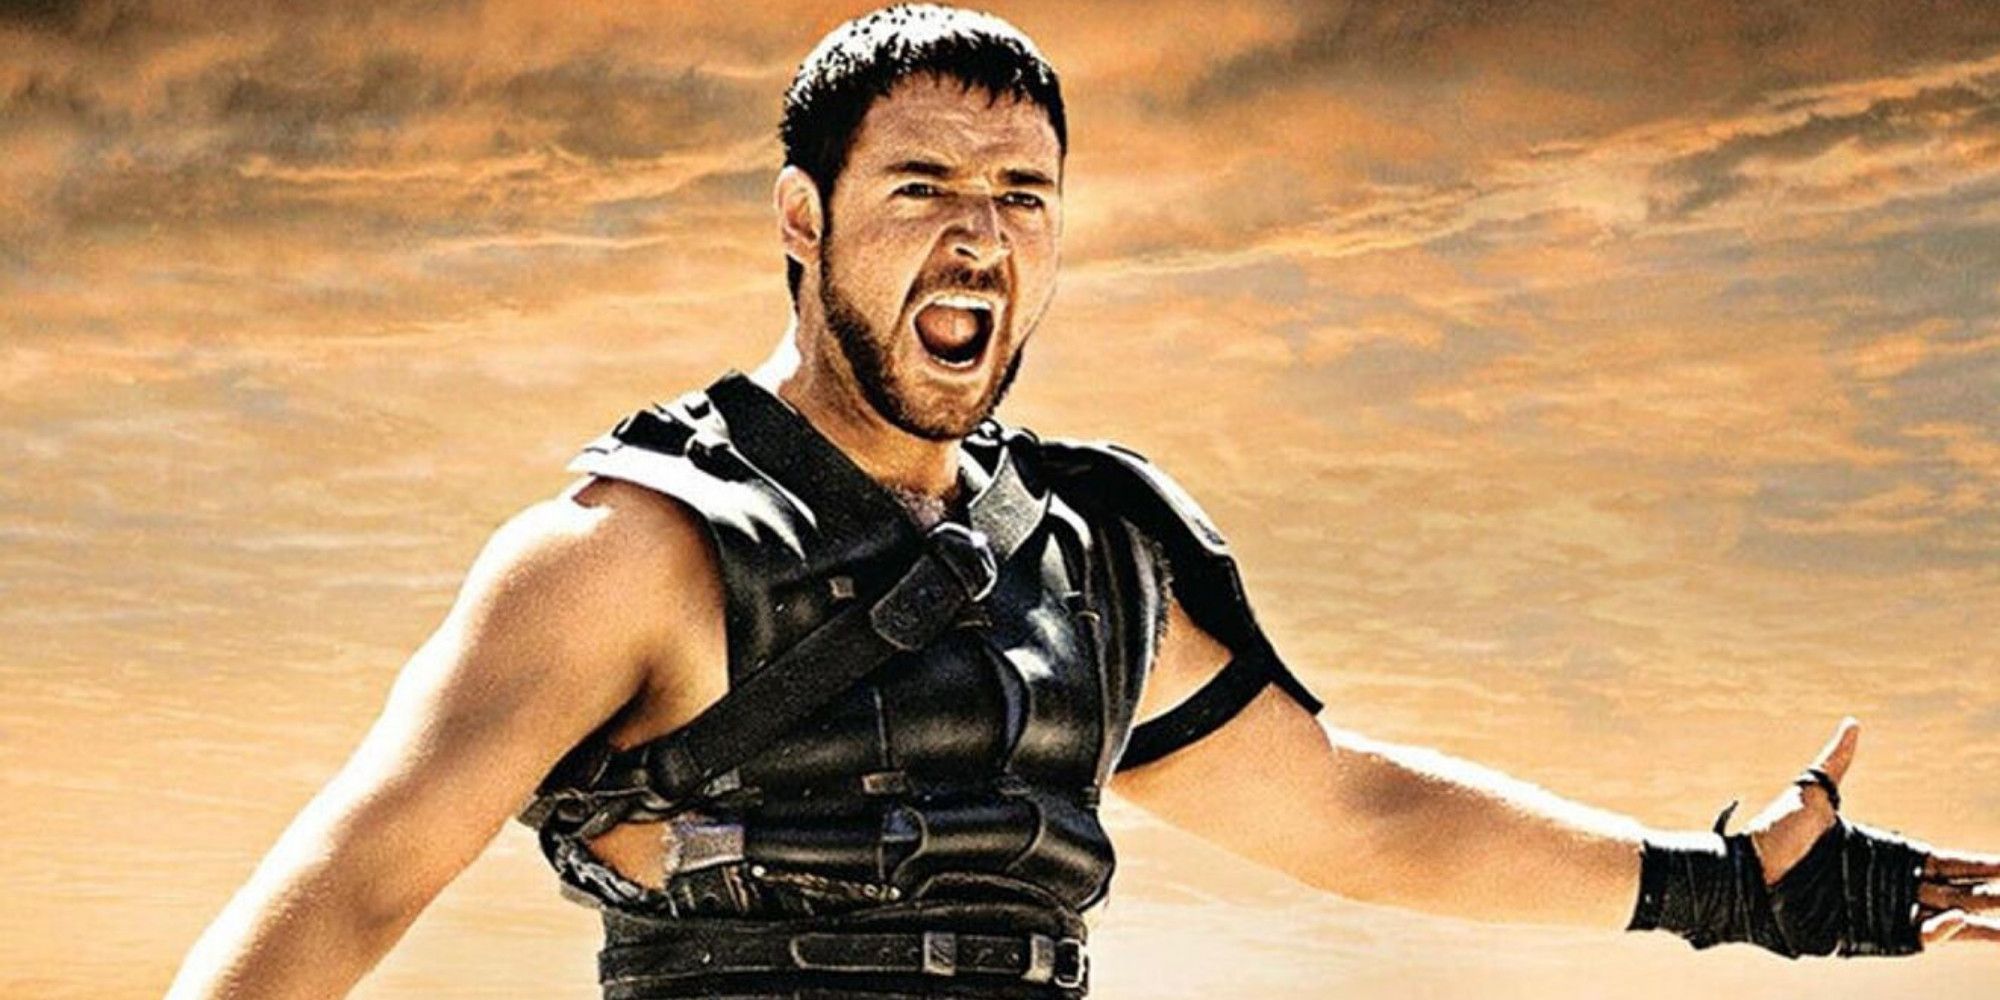 Russell Crowe's Maximus looks intense in Gladiator